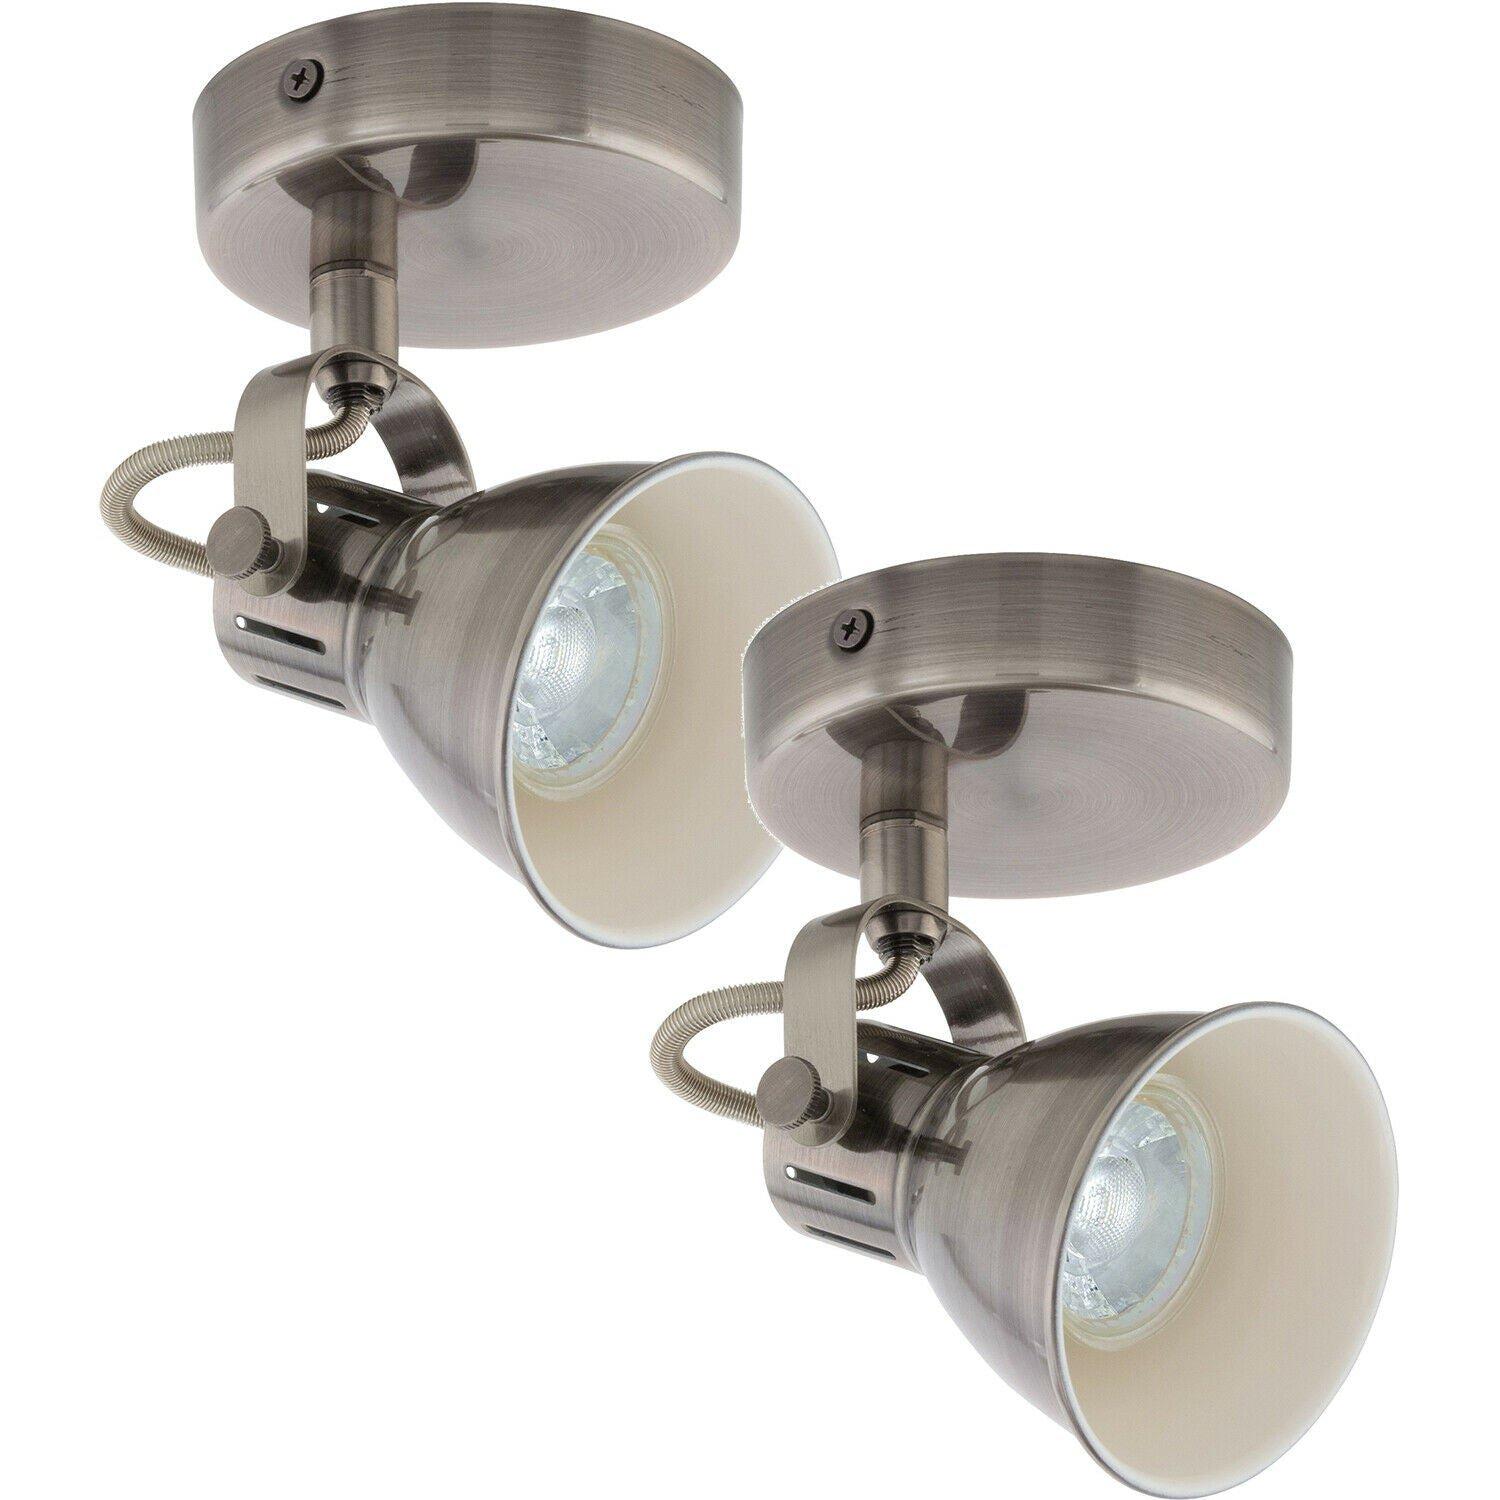 2 PACK Wall 1 Spot Light Colour Nickel Antique Creme Shade GU10 3.3W Included